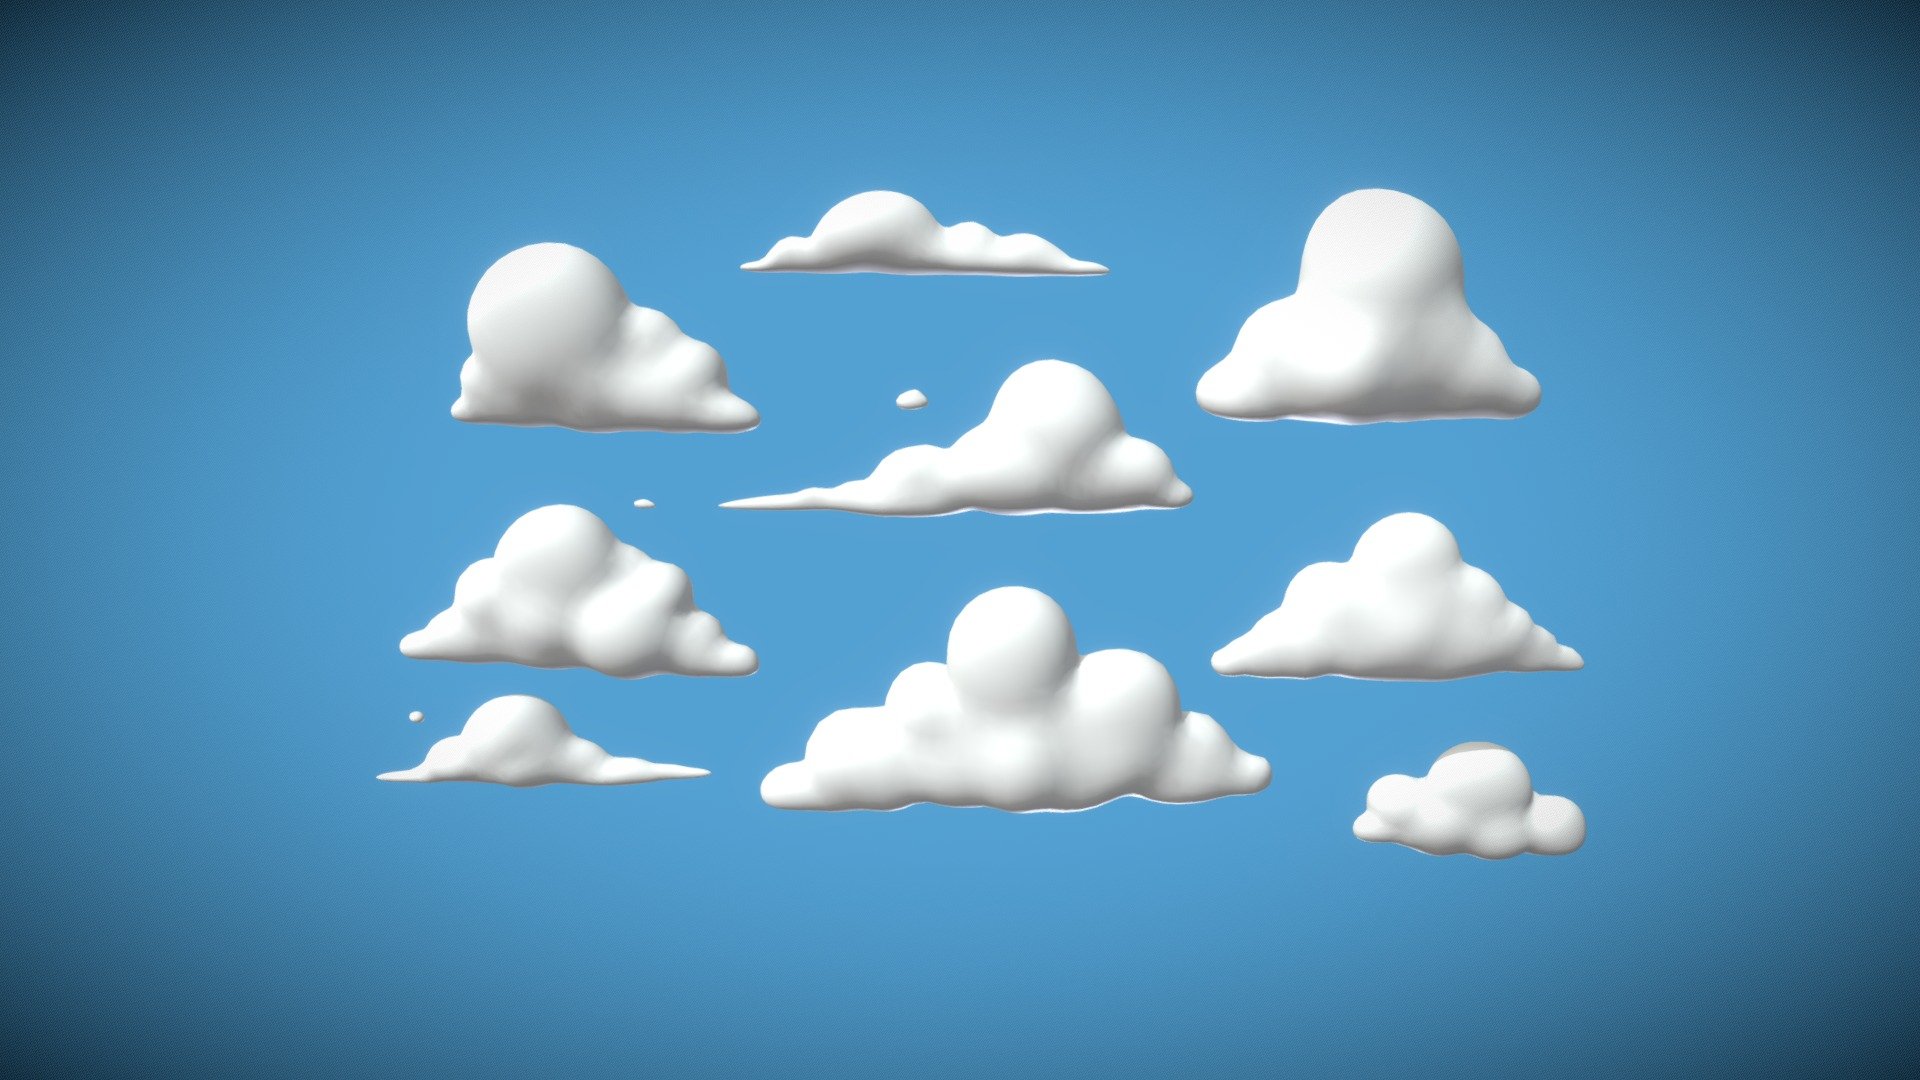 Cartoon clouds pack All seperated in differtent .obj files (and files with them all together in FBX, OBJ and BLEND) Polycount differce from cloud to cloud. Most of them are around the 1000 faces. Smallest is around 800 faces. Total amount of faces 9591 Total amount of vertices 9599

If you have any questions or requests regarding these or other models, let me know 3d model